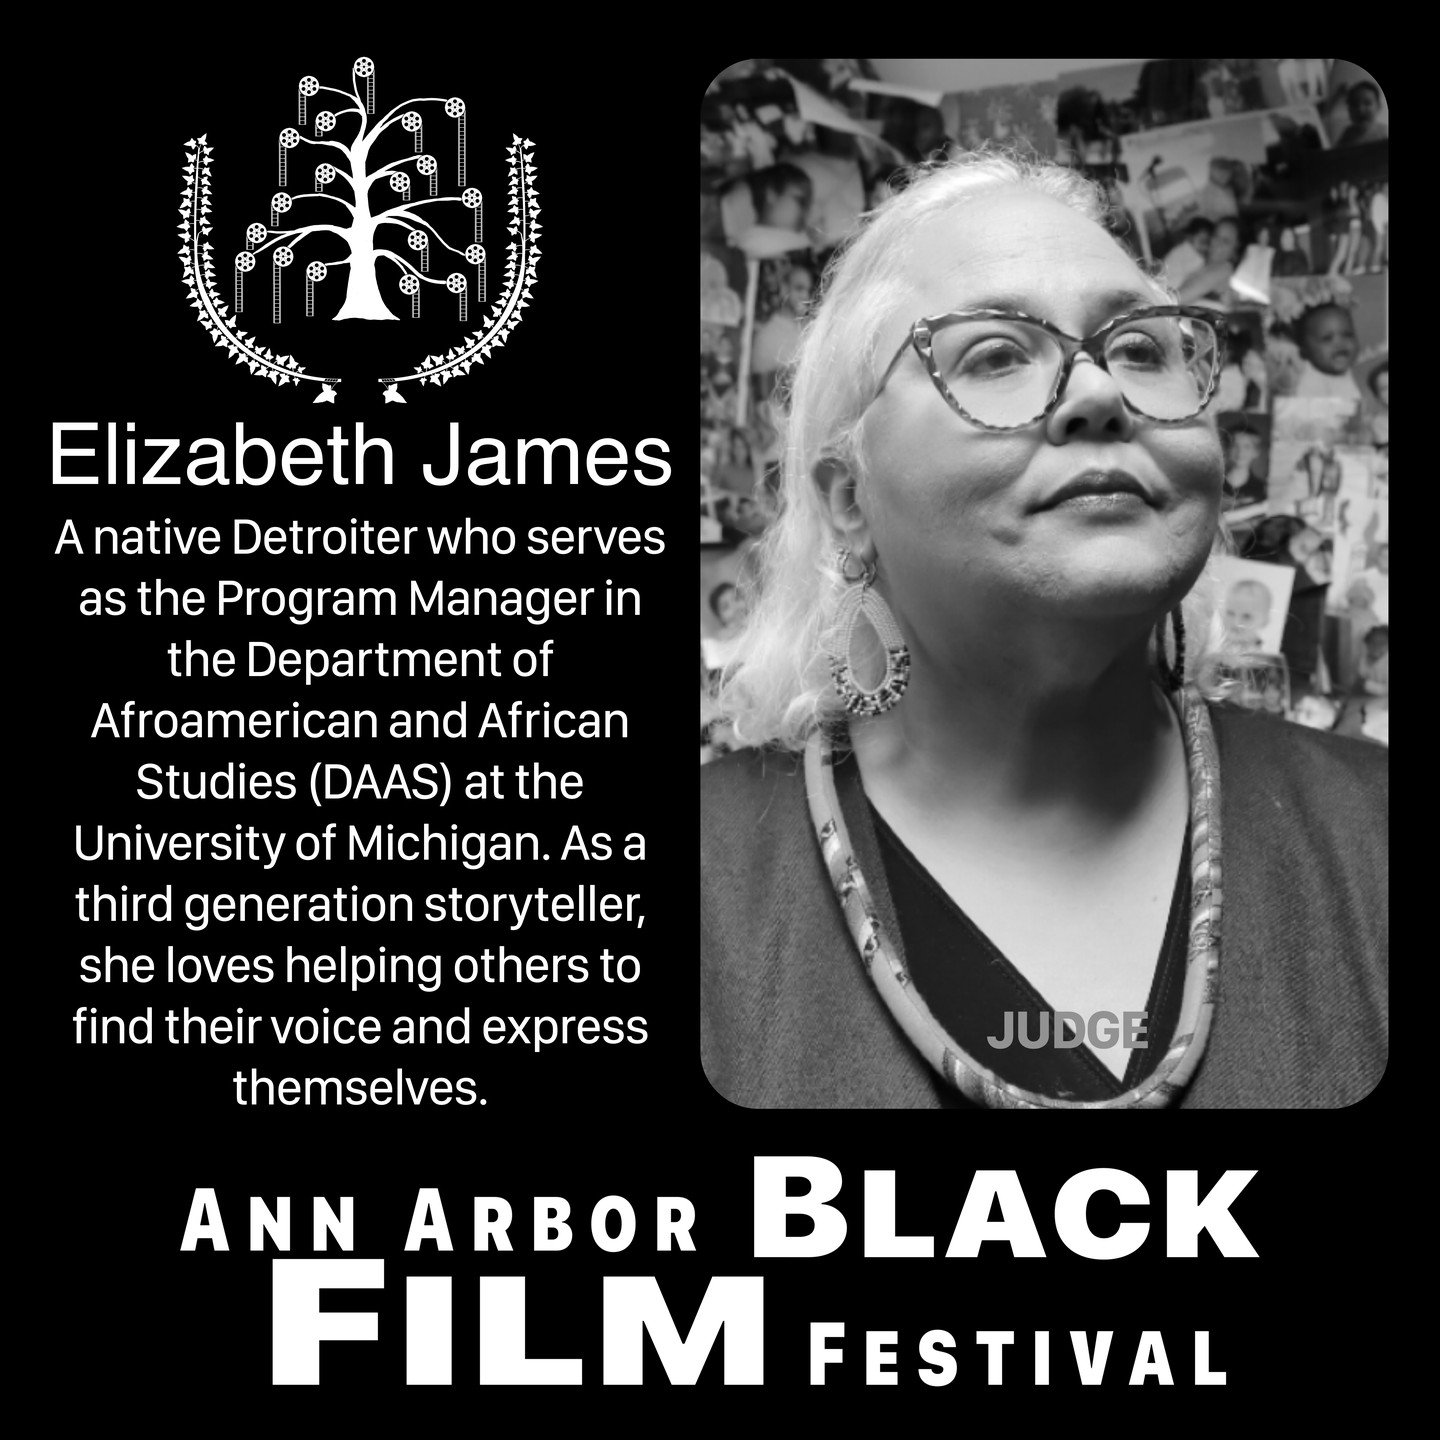 Meet our final Judge!

Submissions are closed

Visit us at a2bff.org

Thank you for submitting!